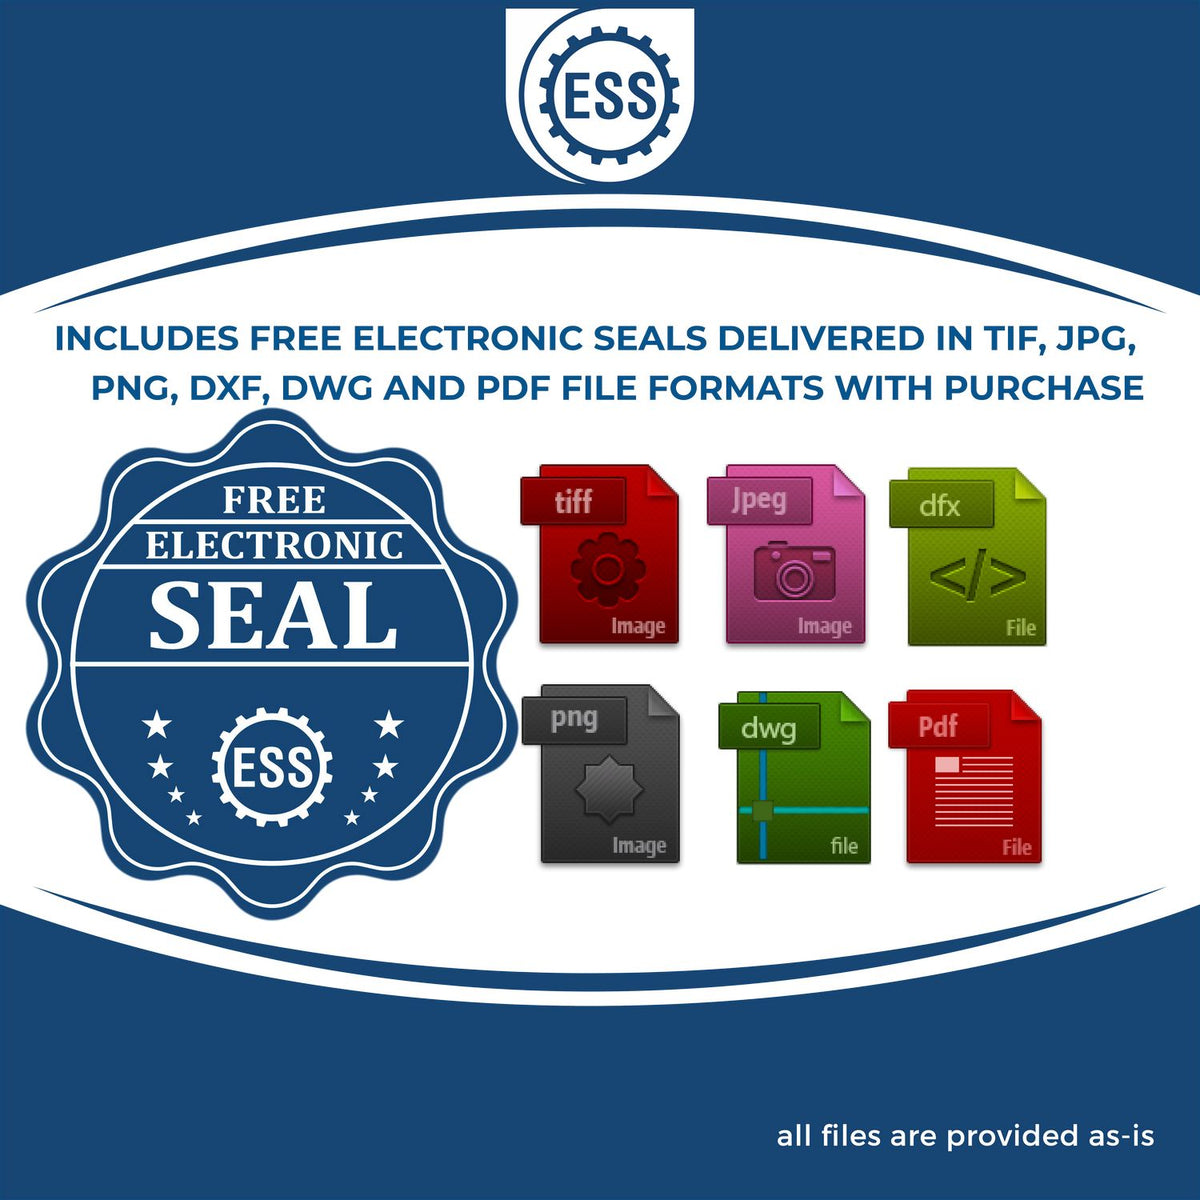 An infographic for the free electronic seal for the Gift Nebraska Landscape Architect Seal illustrating the different file type icons such as DXF, DWG, TIF, JPG and PNG.